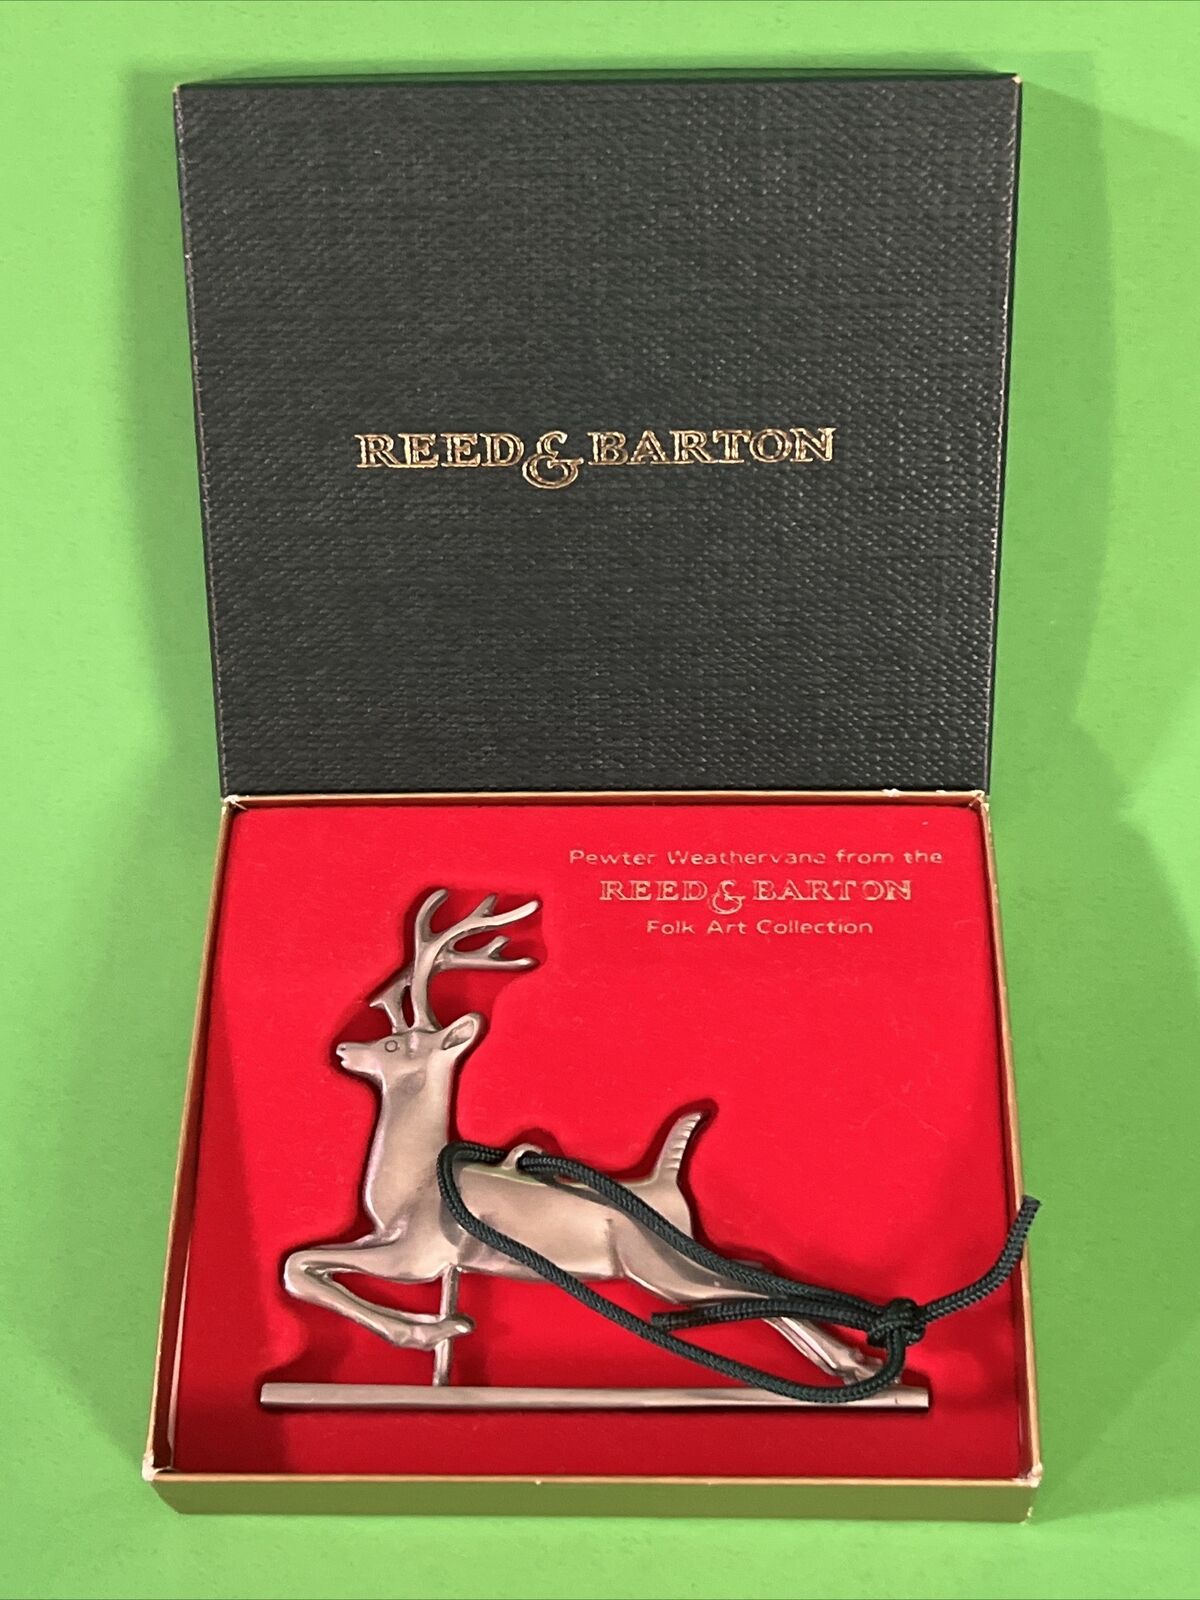 Reed & Barton Deer Sleigh Christmas Ornament Handcrafted Silver Siver Vintage